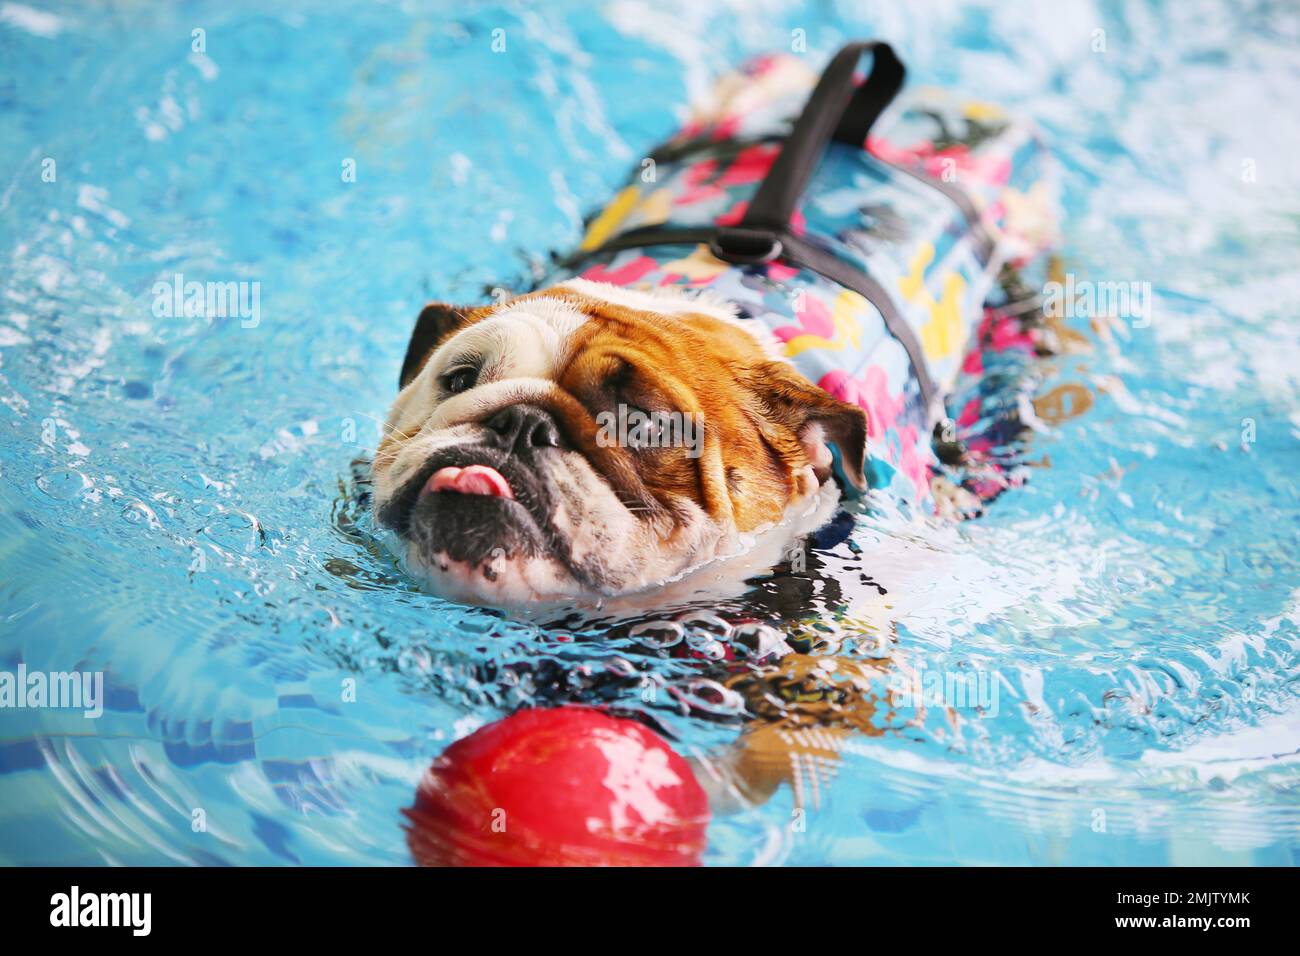 English Bulldog wearing life jacket and playing with toy in the pool. Dog swimming. Stock Photo